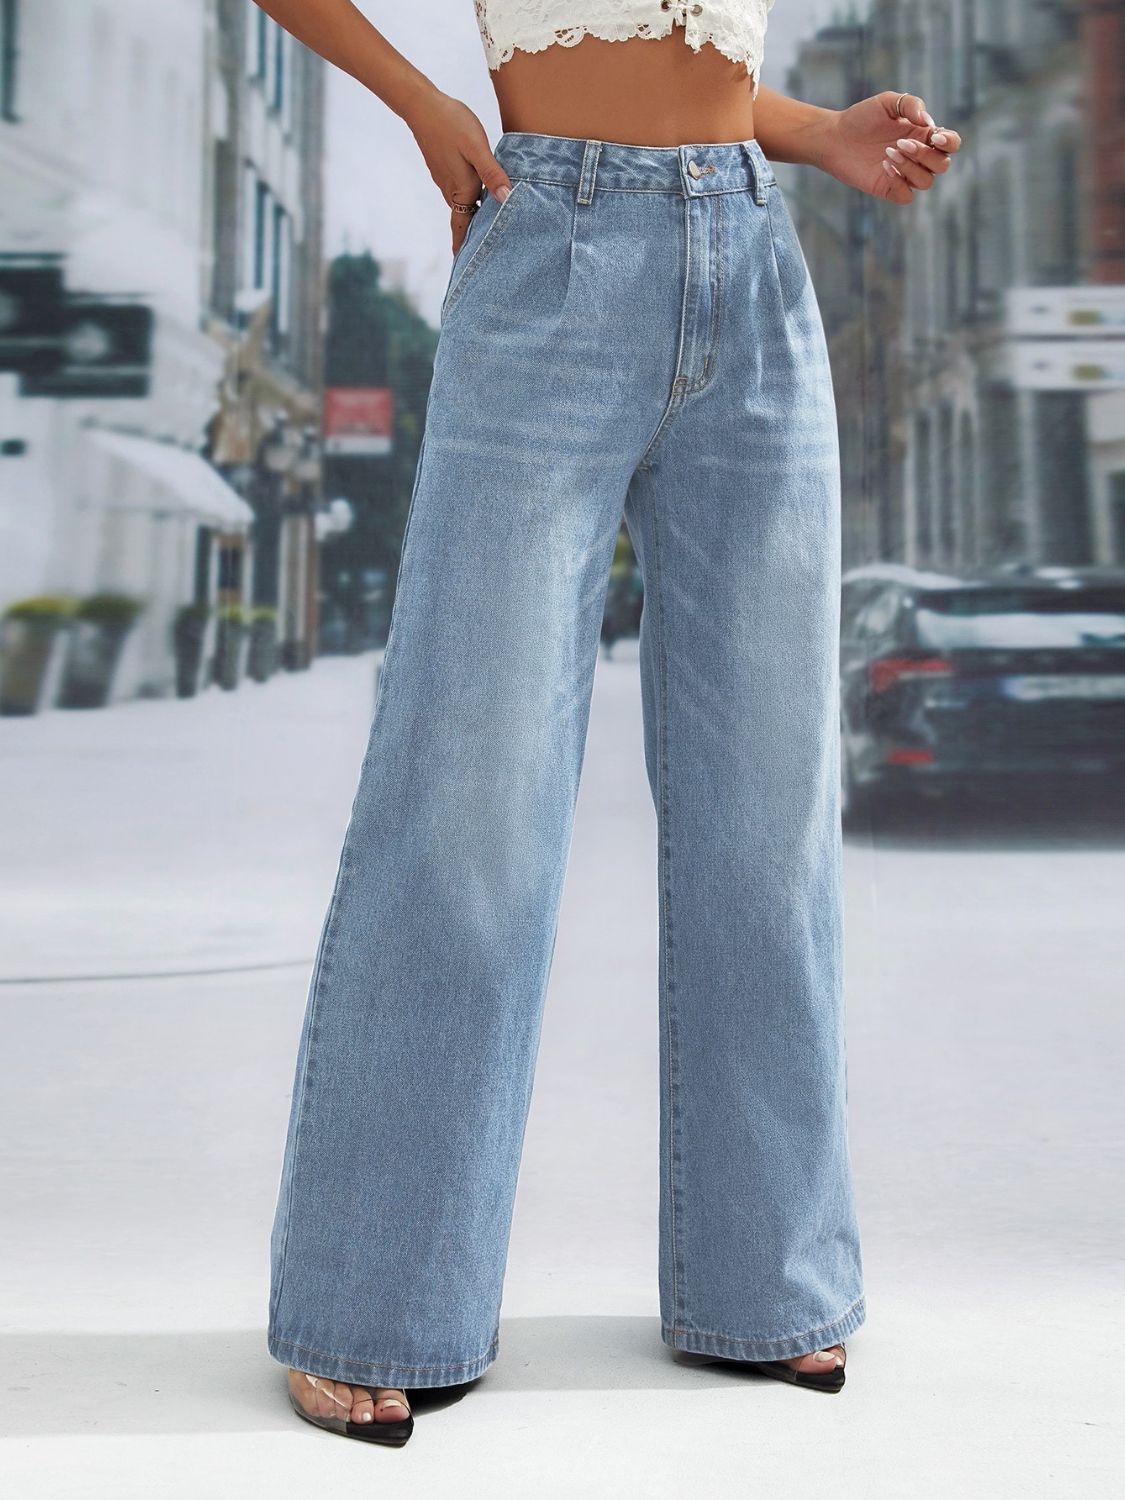 Gray Wide Leg Jeans with Pockets Sentient Beauty Fashions Apparel & Accessories